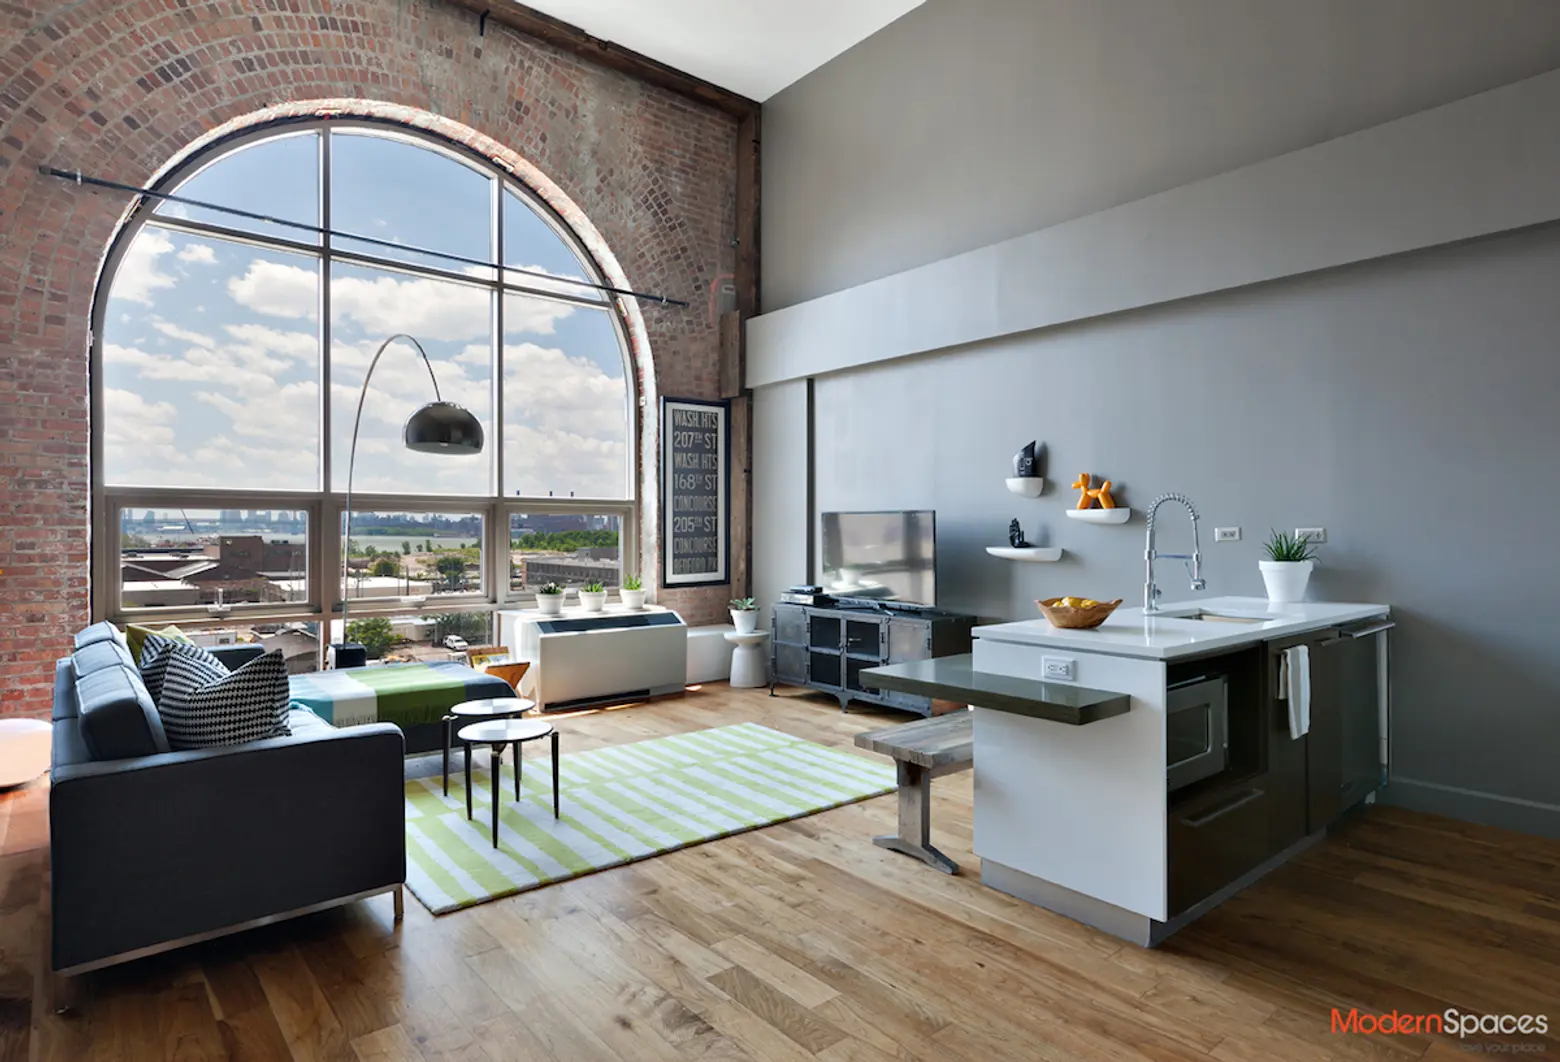 2-17 51st Avenue, The Powerhouse condos, modern loft with luxury amenities, iconic arched window